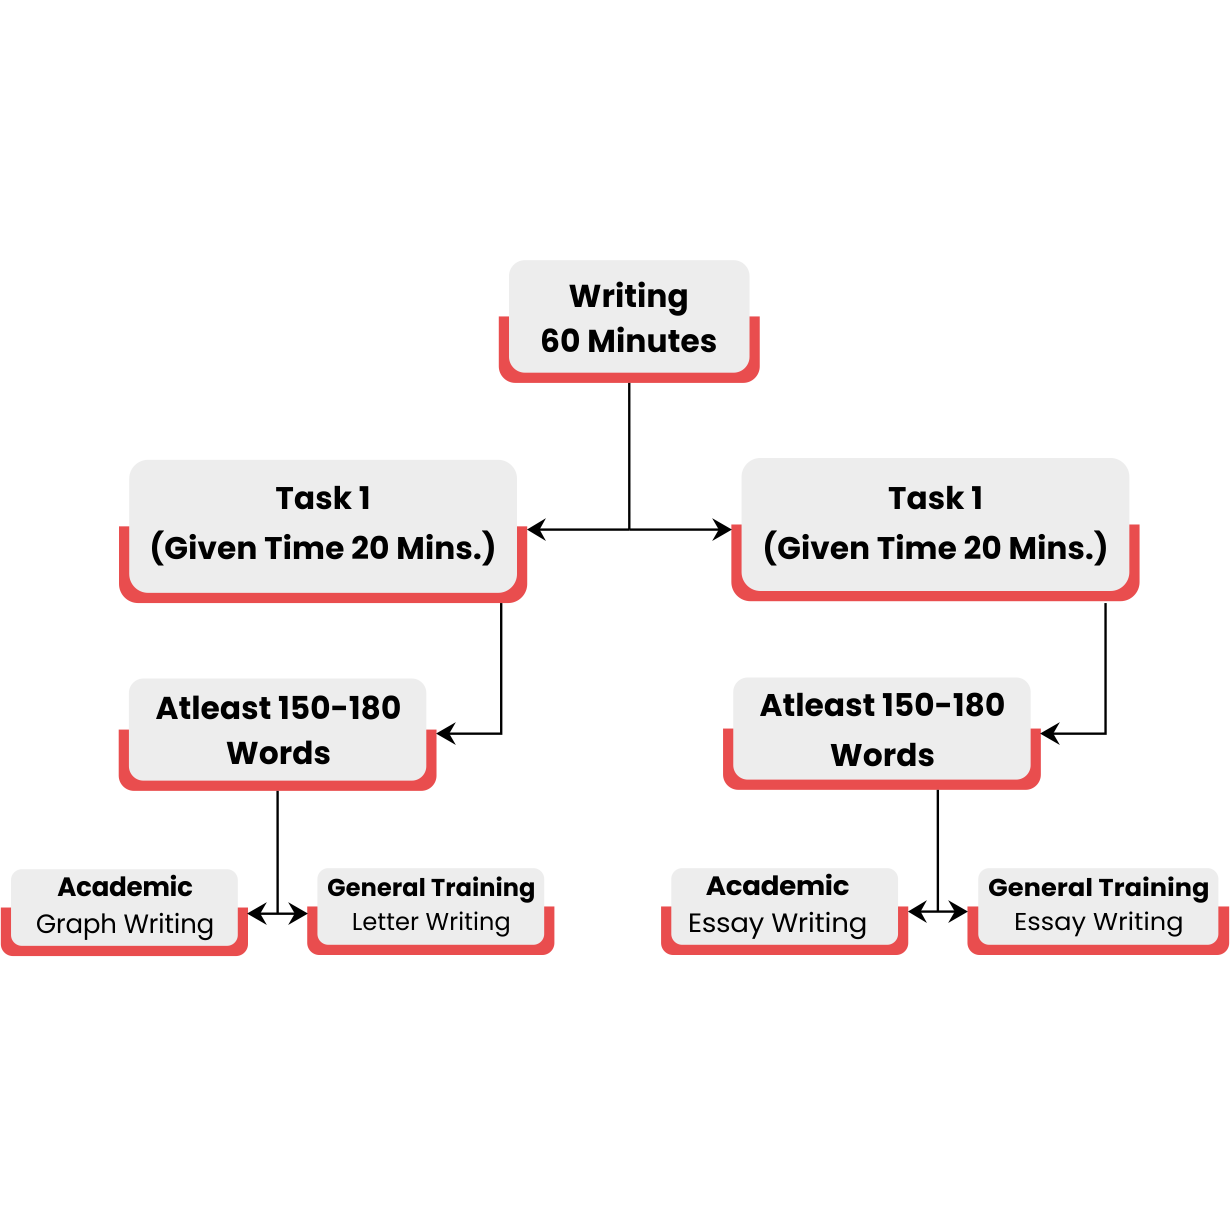 IELTS test format for writing